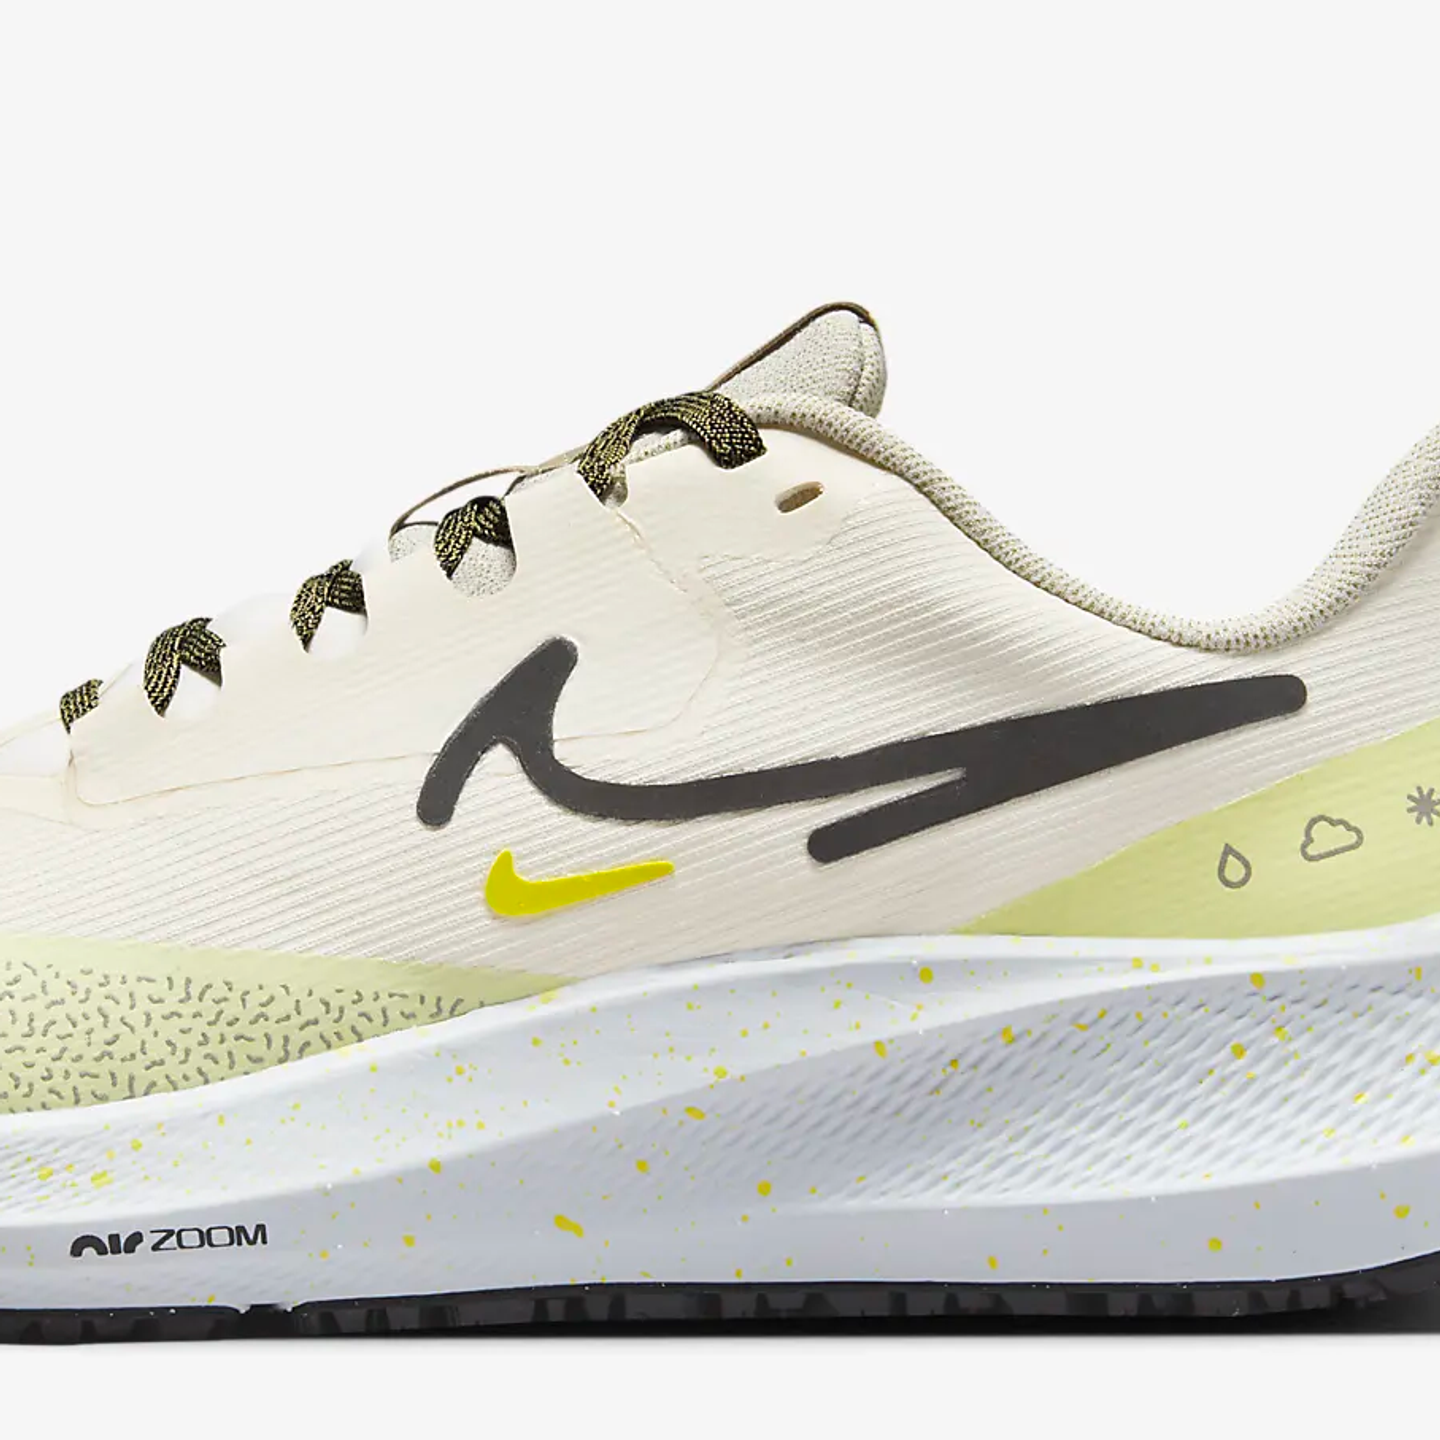 a pair of white and yellow nike running shoes​​​​‌﻿‍﻿​‍​‍‌‍﻿﻿‌﻿​‍‌‍‍‌‌‍‌﻿‌‍‍‌‌‍﻿‍​‍​‍​﻿‍‍​‍​‍‌﻿​﻿‌‍​‌‌‍﻿‍‌‍‍‌‌﻿‌​‌﻿‍‌​‍﻿‍‌‍‍‌‌‍﻿﻿​‍​‍​‍﻿​​‍​‍‌‍‍​‌﻿​‍‌‍‌‌‌‍‌‍​‍​‍​﻿‍‍​‍​‍‌‍‍​‌﻿‌​‌﻿‌​‌﻿​​​﻿‍‍​‍﻿﻿​‍﻿﻿‌‍﻿​‌‍﻿﻿‌‍​﻿‌‍​‌‌‍﻿​‌‍‍​‌‍﻿﻿‌﻿​﻿‌﻿‌​​﻿‍‍​﻿​﻿​﻿​﻿​﻿​﻿​﻿​﻿​‍﻿﻿‌‍‍‌‌‍﻿‍‌﻿‌​‌‍‌‌‌‍﻿‍‌﻿‌​​‍﻿﻿‌‍‌‌‌‍‌​‌‍‍‌‌﻿‌​​‍﻿﻿‌‍﻿‌‌‍﻿﻿‌‍‌​‌‍‌‌​﻿﻿‌‌﻿​​‌﻿​‍‌‍‌‌‌﻿​﻿‌‍‌‌‌‍﻿‍‌﻿‌​‌‍​‌‌﻿‌​‌‍‍‌‌‍﻿﻿‌‍﻿‍​﻿‍﻿‌‍‍‌‌‍‌​​﻿﻿‌​﻿​​‌‍‌‌​﻿‌‍‌‍‌‍‌‍​‌​﻿​‍​﻿​﻿​﻿‌‌​‍﻿‌​﻿​﻿‌‍​‍‌‍‌​​﻿‌‌​‍﻿‌​﻿‌​​﻿​‌‌‍​﻿‌‍​﻿​‍﻿‌​﻿‍‌‌‍‌‍​﻿​‍​﻿‌‌​‍﻿‌​﻿‌‌​﻿​﻿‌‍‌​‌‍​﻿​﻿​​‌‍​‌​﻿‌‌‌‍‌‍‌‍‌‍​﻿‌﻿‌‍‌​​﻿​‍​﻿‍﻿‌﻿‌​‌﻿‍‌‌﻿​​‌‍‌‌​﻿﻿‌‌﻿​﻿‌‍‍​‌‍﻿﻿‌‍‌‌​﻿‍﻿‌﻿​​‌‍​‌‌﻿‌​‌‍‍​​﻿﻿‌‌‍﻿‌‌‍‌‌‌‍‌​‌‍‍‌‌‍​‌​‍‌‌​﻿‌‌‌​​‍‌‌﻿﻿‌‍‍﻿‌‍‌‌‌﻿‍‌​‍‌‌​﻿​﻿‌​‌​​‍‌‌​﻿​﻿‌​‌​​‍‌‌​﻿​‍​﻿​‍​﻿‍​​﻿​‌‌‍​‌‌‍‌​‌‍‌‌‌‍‌‌​﻿​‌​﻿‌‌‌‍‌‍​﻿‌﻿​﻿‌​‌‍‌‍​‍‌‌​﻿​‍​﻿​‍​‍‌‌​﻿‌‌‌​‌​​‍﻿‍‌‍​‌‌‍﻿​‌﻿‌​​﻿﻿﻿‌‍​‍‌‍​‌‌﻿​﻿‌‍‌‌‌‌‌‌‌﻿​‍‌‍﻿​​﻿﻿‌‌‍‍​‌﻿‌​‌﻿‌​‌﻿​​​‍‌‌​﻿​﻿‌​​‌​‍‌‌​﻿​‍‌​‌‍​‍‌‌​﻿​‍‌​‌‍‌‍﻿​‌‍﻿﻿‌‍​﻿‌‍​‌‌‍﻿​‌‍‍​‌‍﻿﻿‌﻿​﻿‌﻿‌​​‍‌‌​﻿​﻿‌​​‌​﻿​﻿​﻿​﻿​﻿​﻿​﻿​﻿​‍‌‍‌‍‍‌‌‍‌​​﻿﻿‌​﻿​​‌‍‌‌​﻿‌‍‌‍‌‍‌‍​‌​﻿​‍​﻿​﻿​﻿‌‌​‍﻿‌​﻿​﻿‌‍​‍‌‍‌​​﻿‌‌​‍﻿‌​﻿‌​​﻿​‌‌‍​﻿‌‍​﻿​‍﻿‌​﻿‍‌‌‍‌‍​﻿​‍​﻿‌‌​‍﻿‌​﻿‌‌​﻿​﻿‌‍‌​‌‍​﻿​﻿​​‌‍​‌​﻿‌‌‌‍‌‍‌‍‌‍​﻿‌﻿‌‍‌​​﻿​‍​‍‌‍‌﻿‌​‌﻿‍‌‌﻿​​‌‍‌‌​﻿﻿‌‌﻿​﻿‌‍‍​‌‍﻿﻿‌‍‌‌​‍‌‍‌﻿​​‌‍​‌‌﻿‌​‌‍‍​​﻿﻿‌‌‍﻿‌‌‍‌‌‌‍‌​‌‍‍‌‌‍​‌​‍‌‌​﻿‌‌‌​​‍‌‌﻿﻿‌‍‍﻿‌‍‌‌‌﻿‍‌​‍‌‌​﻿​﻿‌​‌​​‍‌‌​﻿​﻿‌​‌​​‍‌‌​﻿​‍​﻿​‍​﻿‍​​﻿​‌‌‍​‌‌‍‌​‌‍‌‌‌‍‌‌​﻿​‌​﻿‌‌‌‍‌‍​﻿‌﻿​﻿‌​‌‍‌‍​‍‌‌​﻿​‍​﻿​‍​‍‌‌​﻿‌‌‌​‌​​‍﻿‍‌‍​‌‌‍﻿​‌﻿‌​​‍​‍‌﻿﻿‌